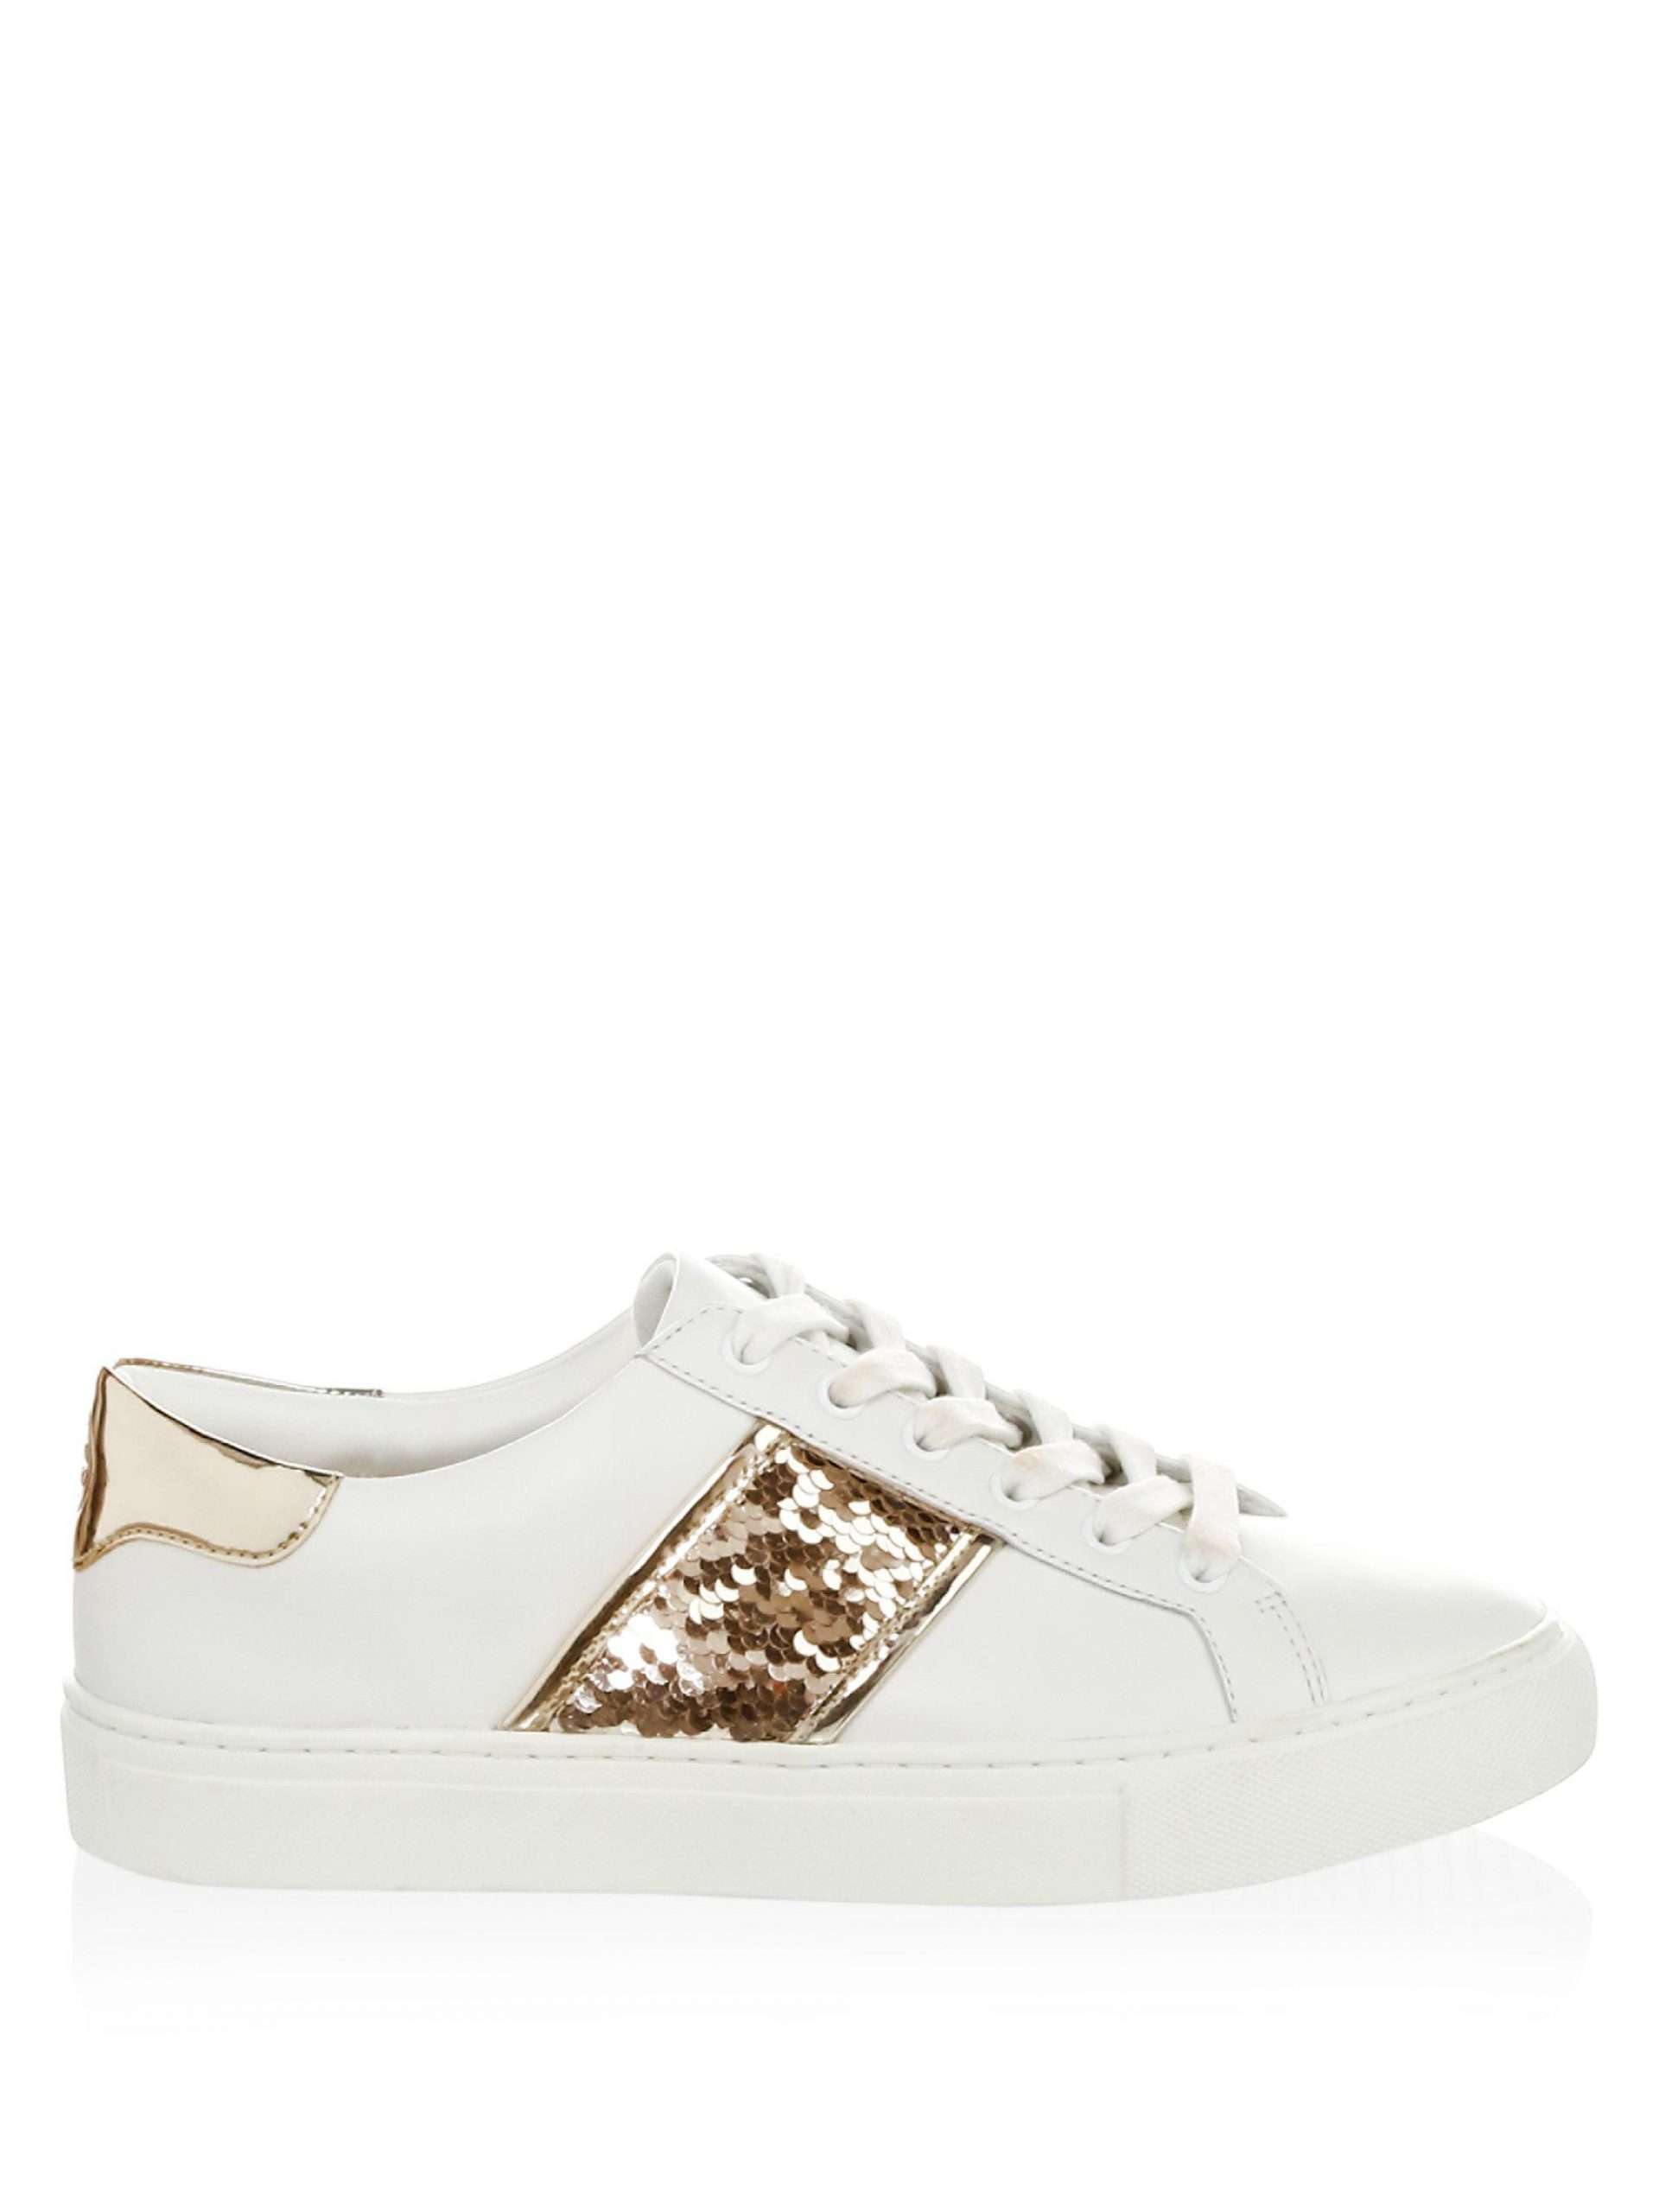 Tory Burch Carter Sequin Leather Sneakers in White